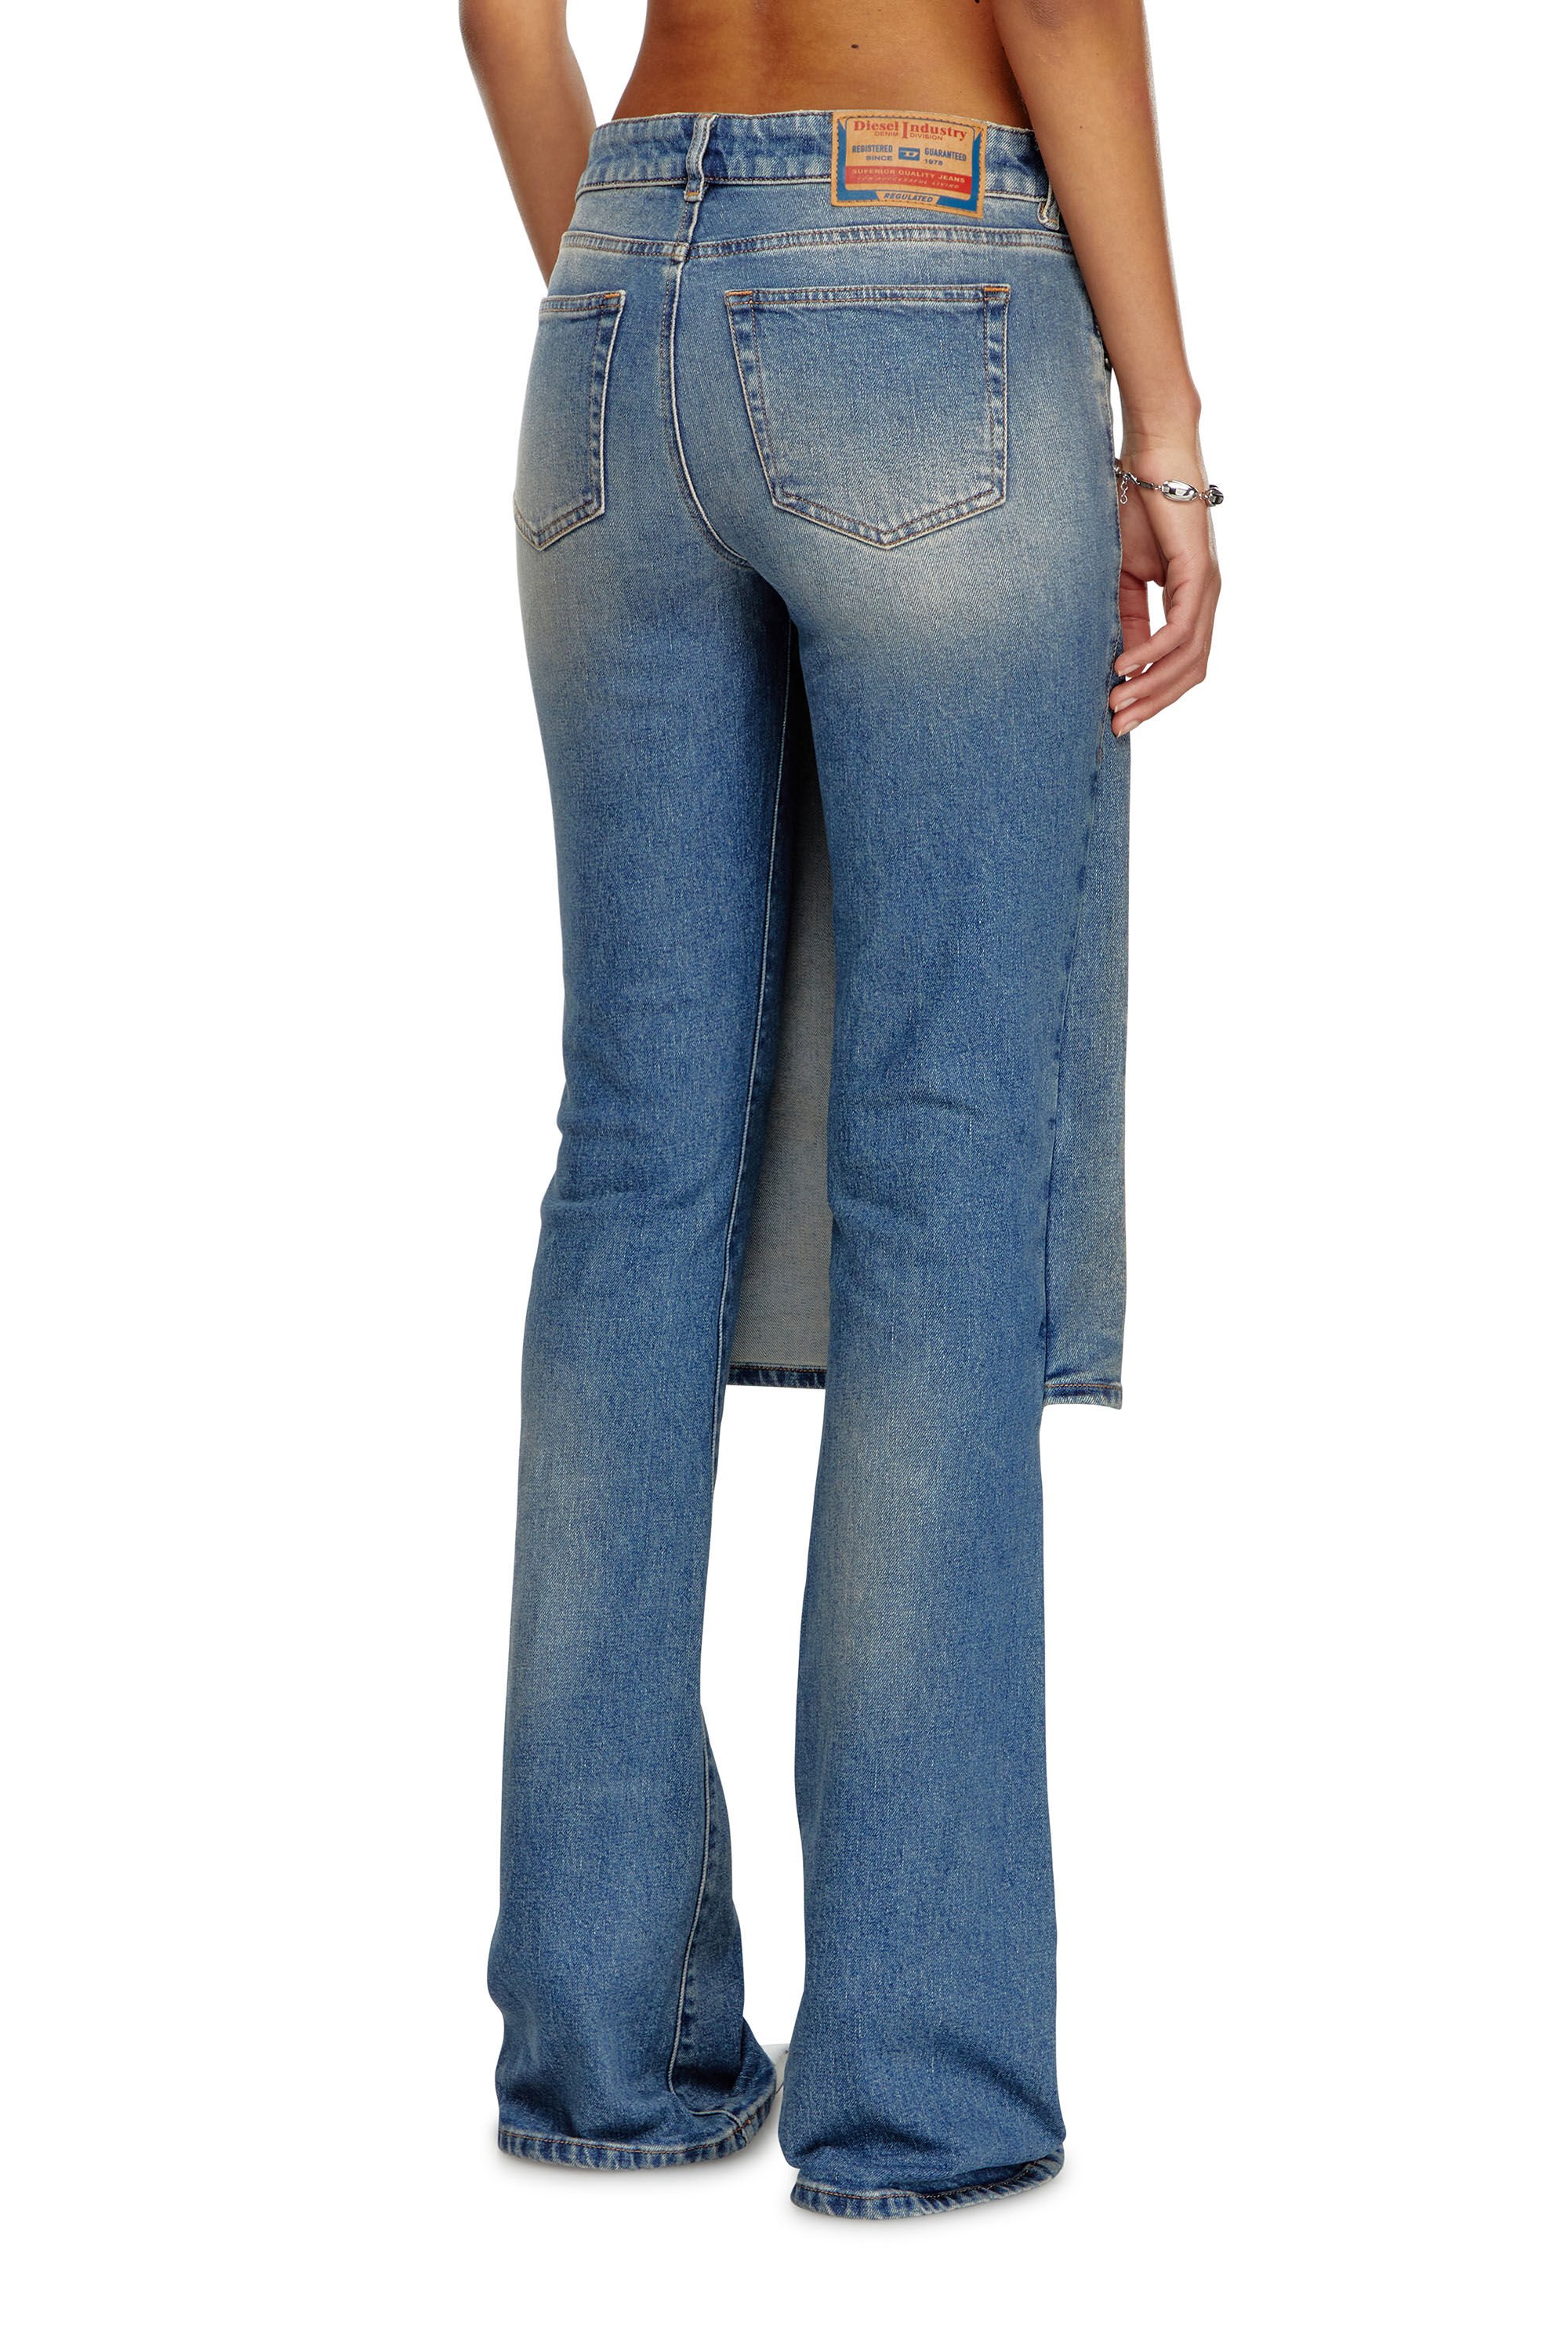 Diesel - Bootcut and Flare Jeans D-Sel 007X8, Mujer Bootcut y Flare Jeans - D-Sel in Azul marino - Image 5